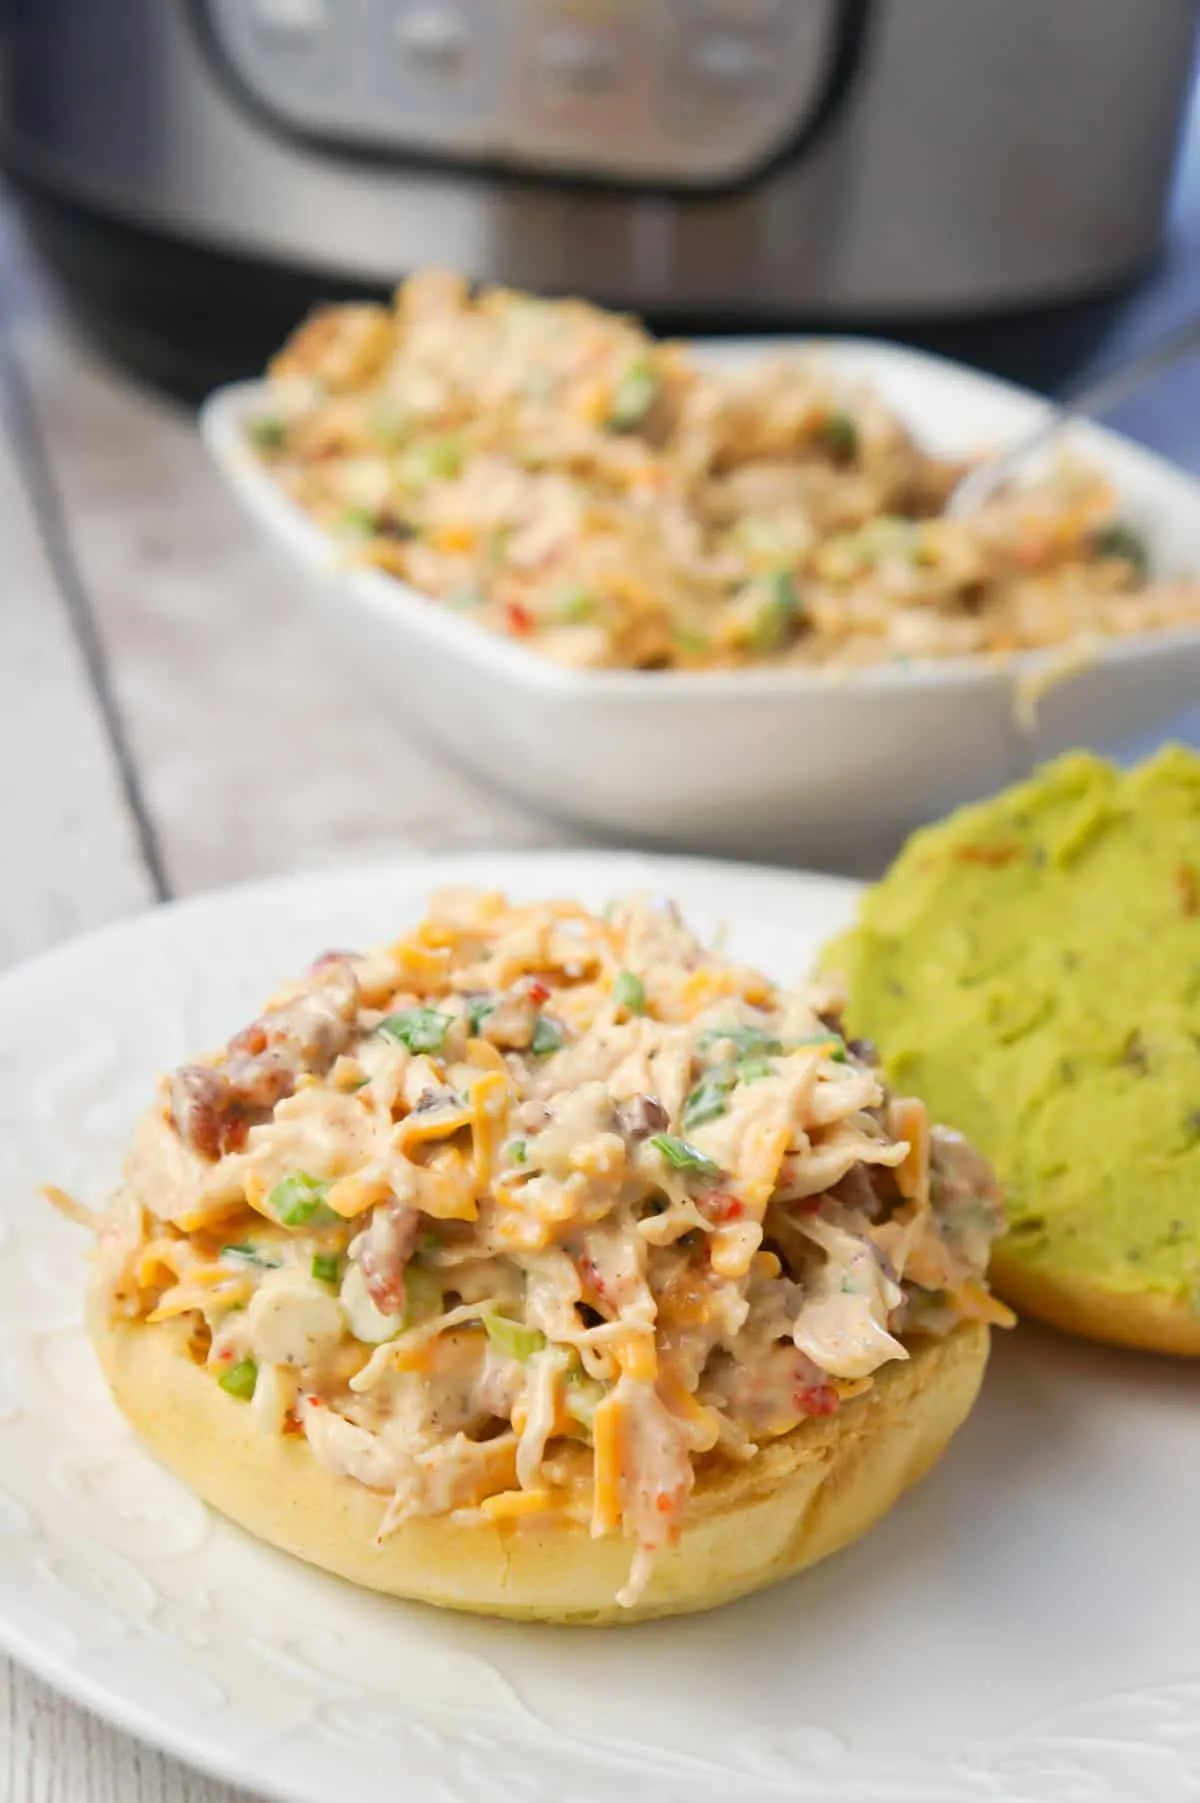 Instant Pot Sweet Chili Bacon Chicken Salad Sandwiches are easy lunch or weeknight dinner recipe using boneless, skinless chicken breasts cooked in the Instant Pot and then tossed with mayo, Thai sweet chili sauce, green onions, crumbled bacon and cheese.